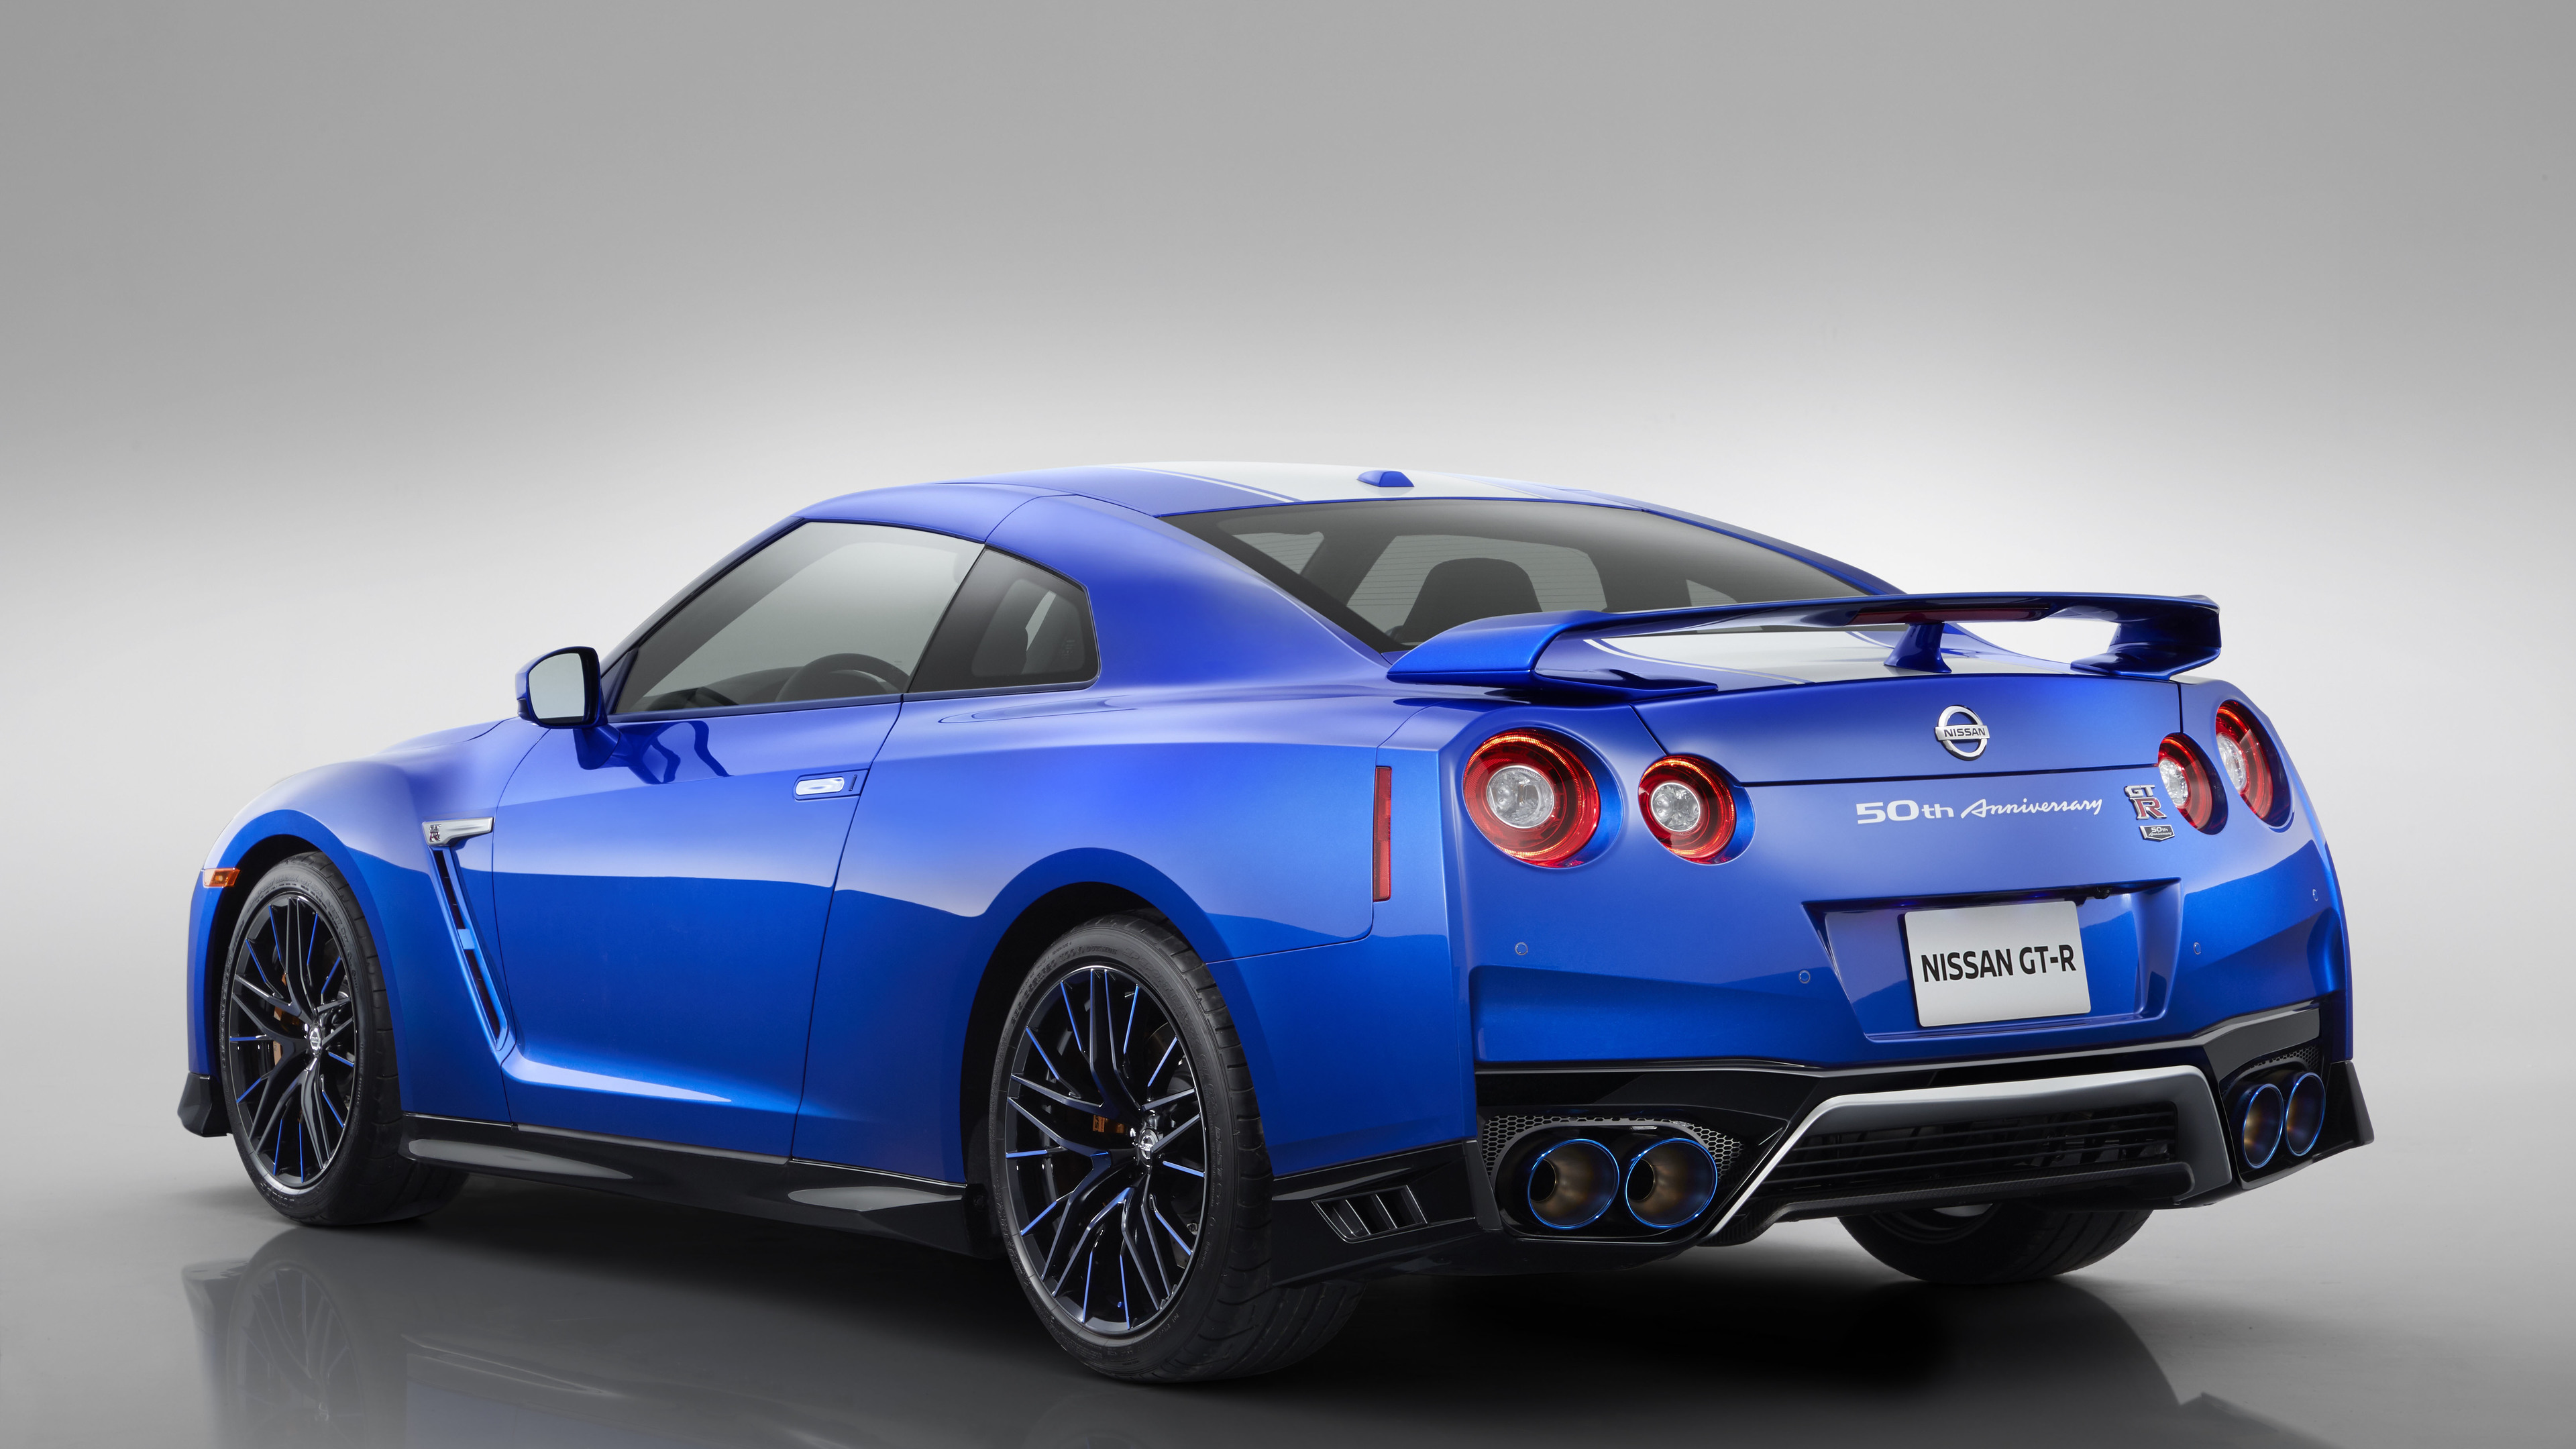 Download 2020 Nissan GT R R35 50th Anniversary Edition Rear 4k nissan wallpapers, nissan gtr wallpapers ...